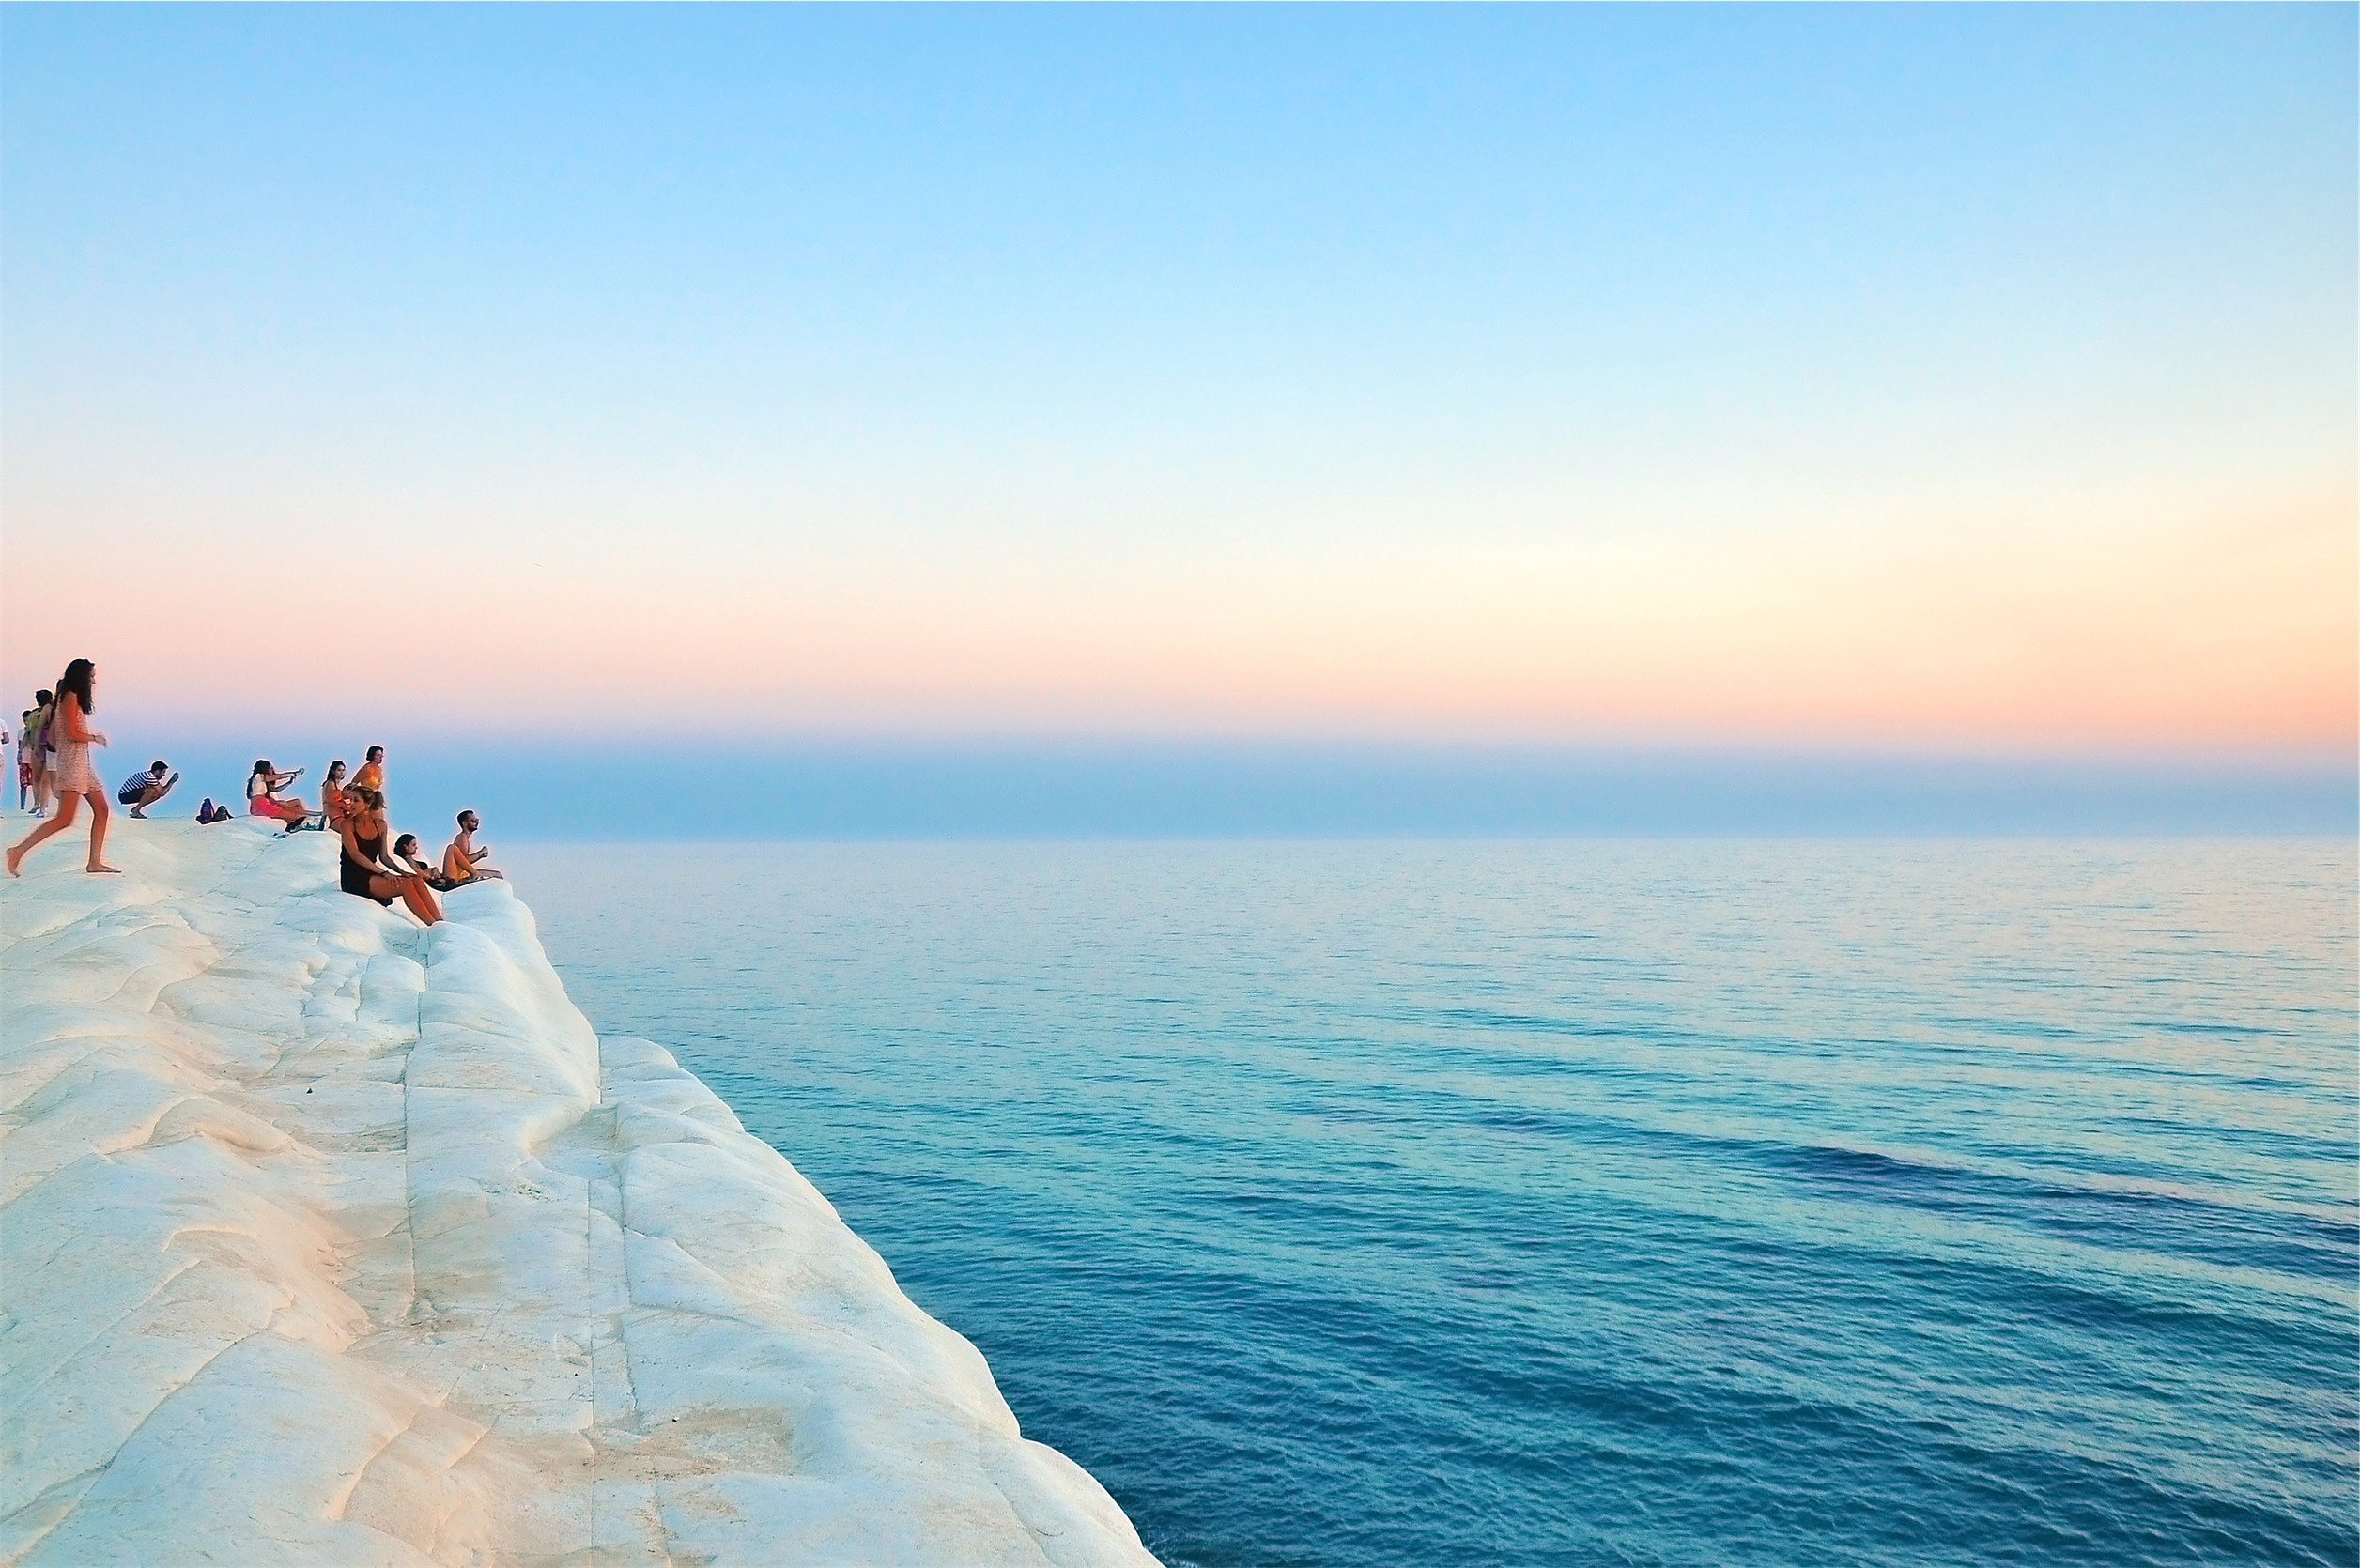 Group of People Sitting on a Coastal Cliff